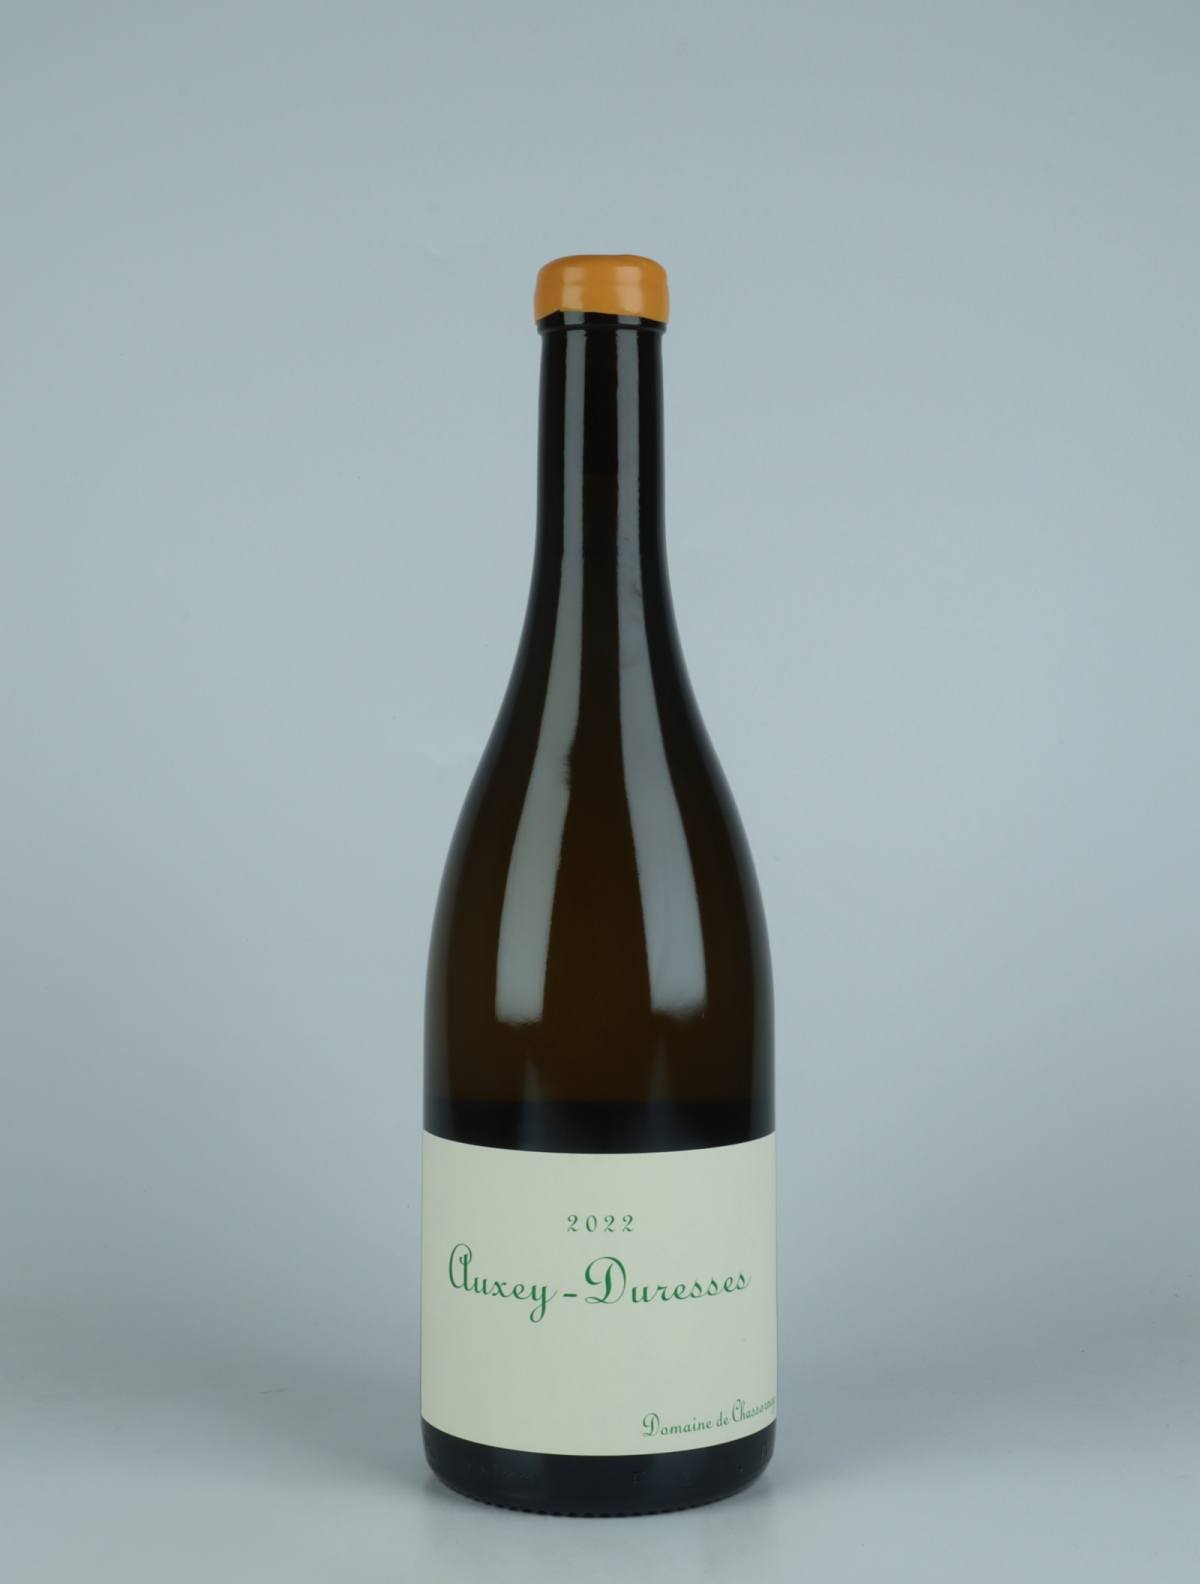 A bottle 2022 Auxey Duresses Blanc White wine from Domaine de Chassorney, Burgundy in France